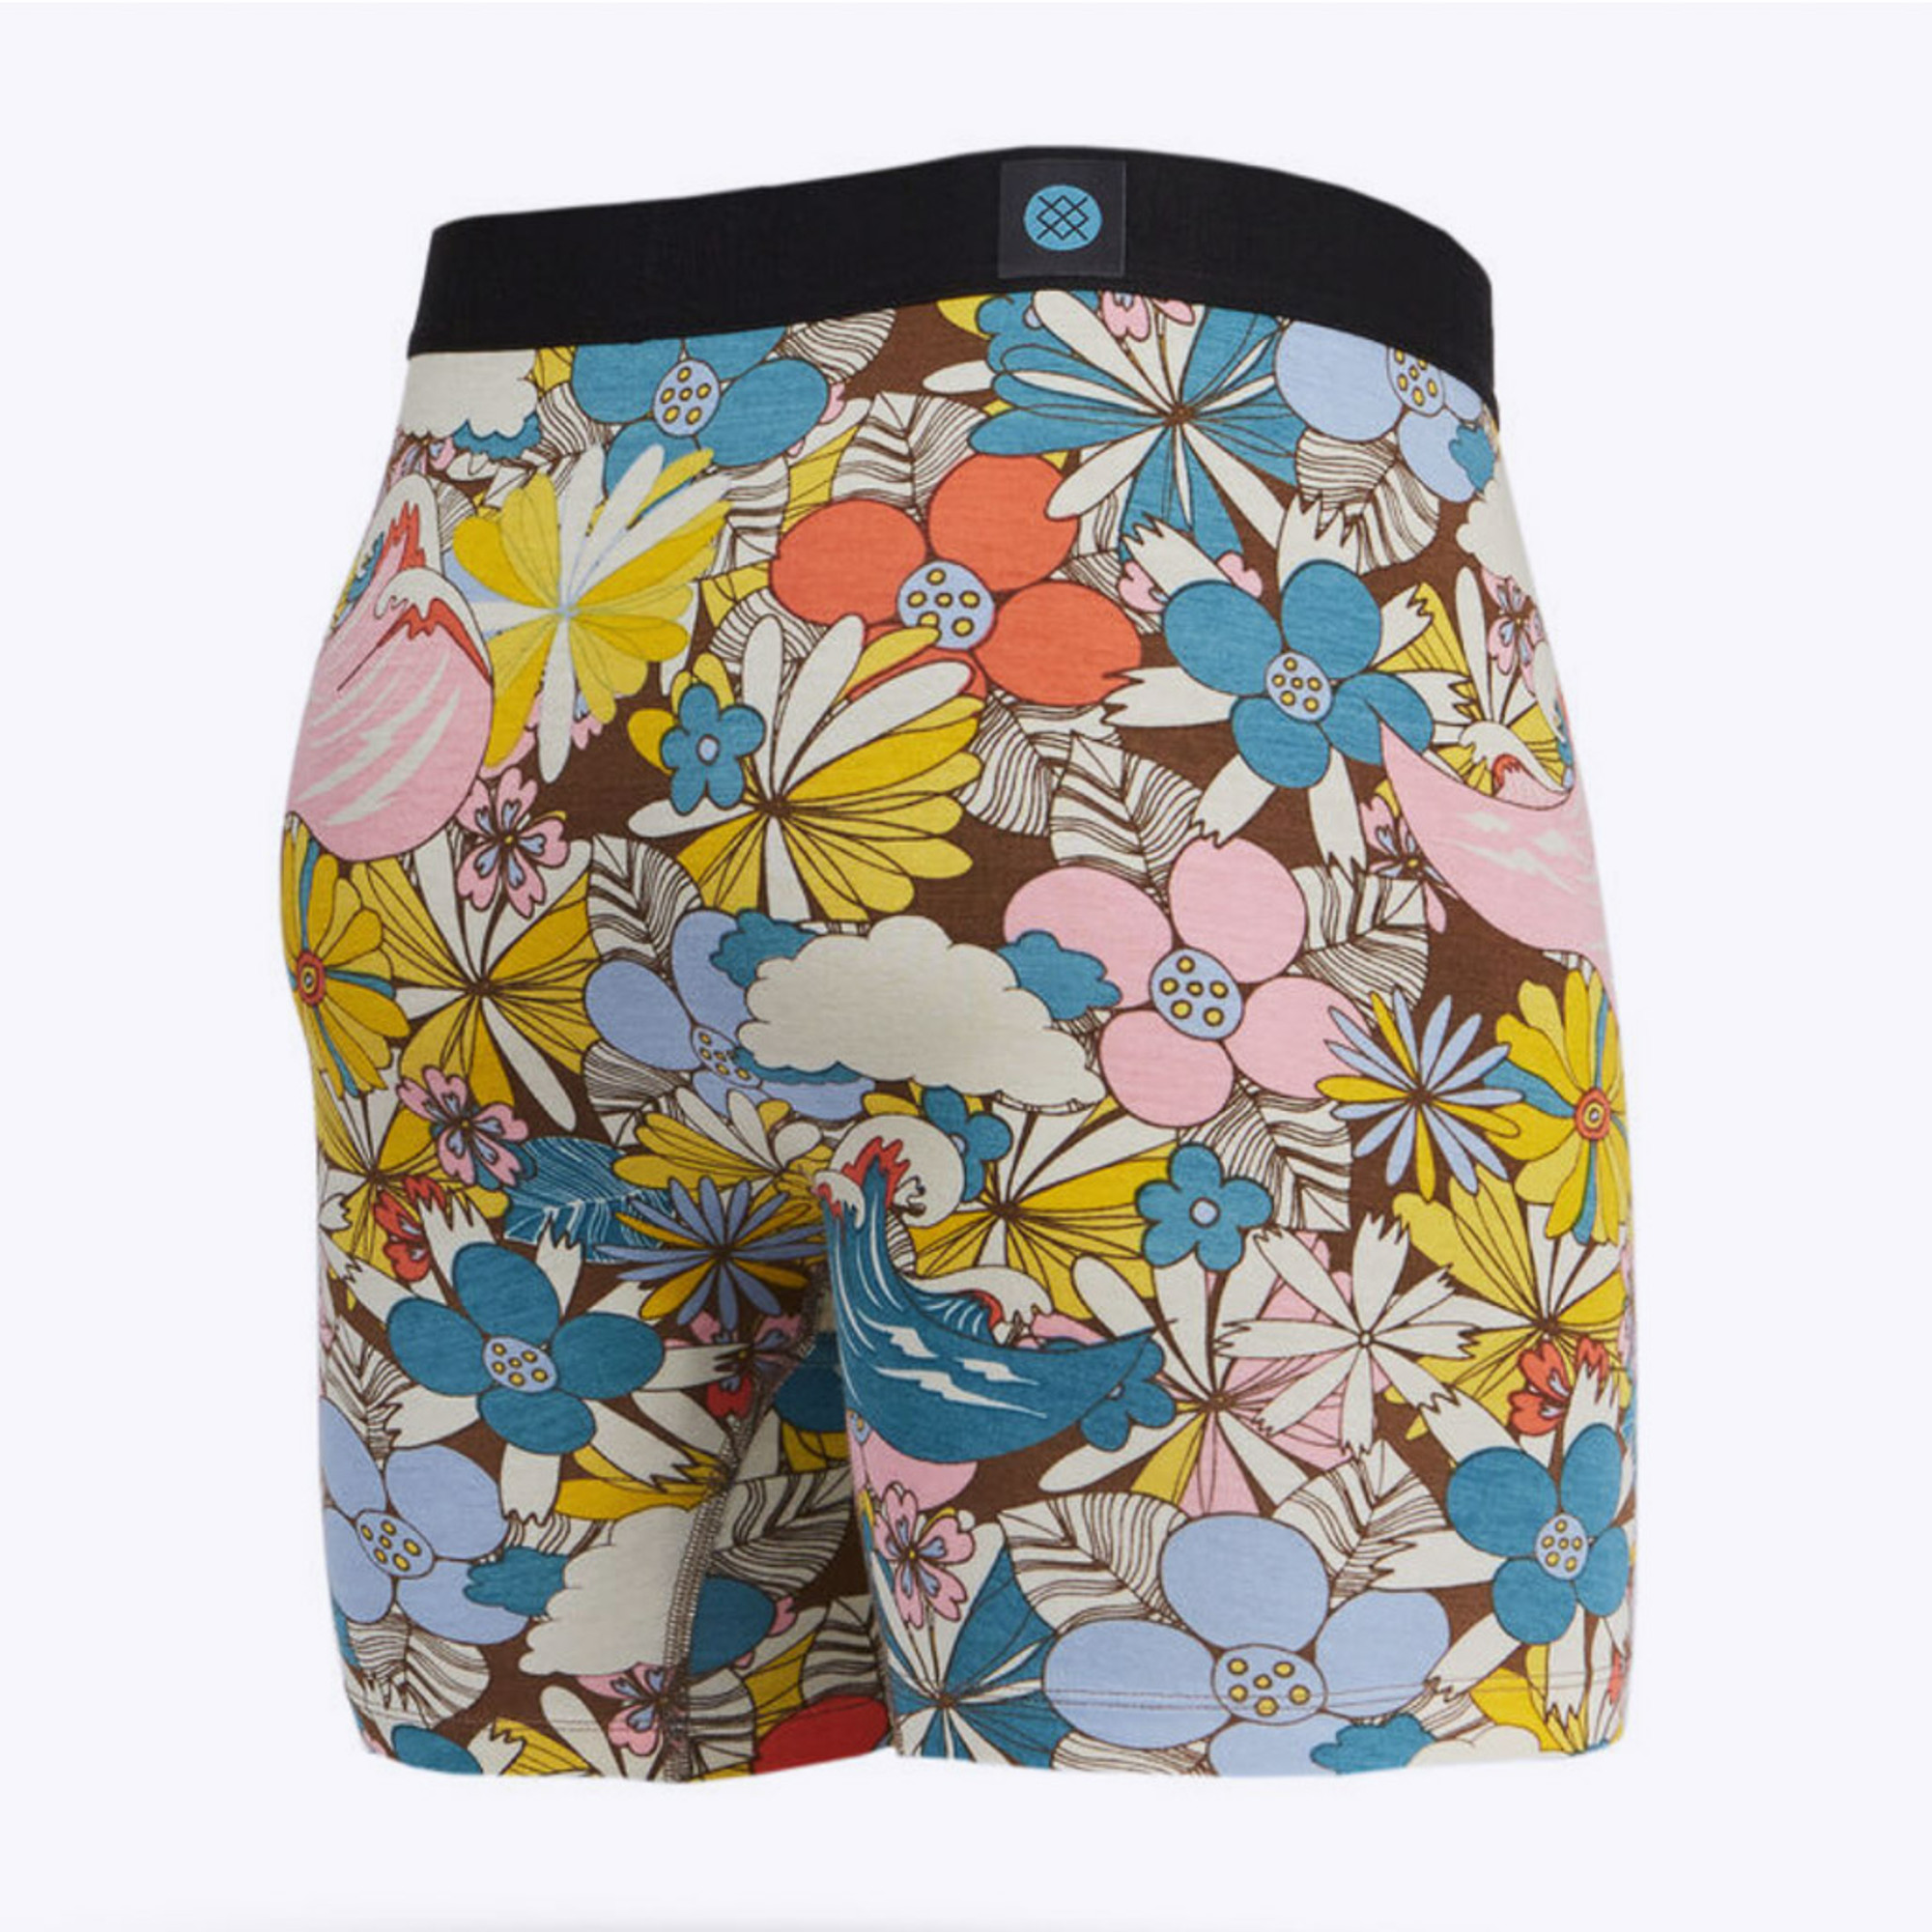 Stance - Butter Blend Boxer Brief - Cloud Cover Pink